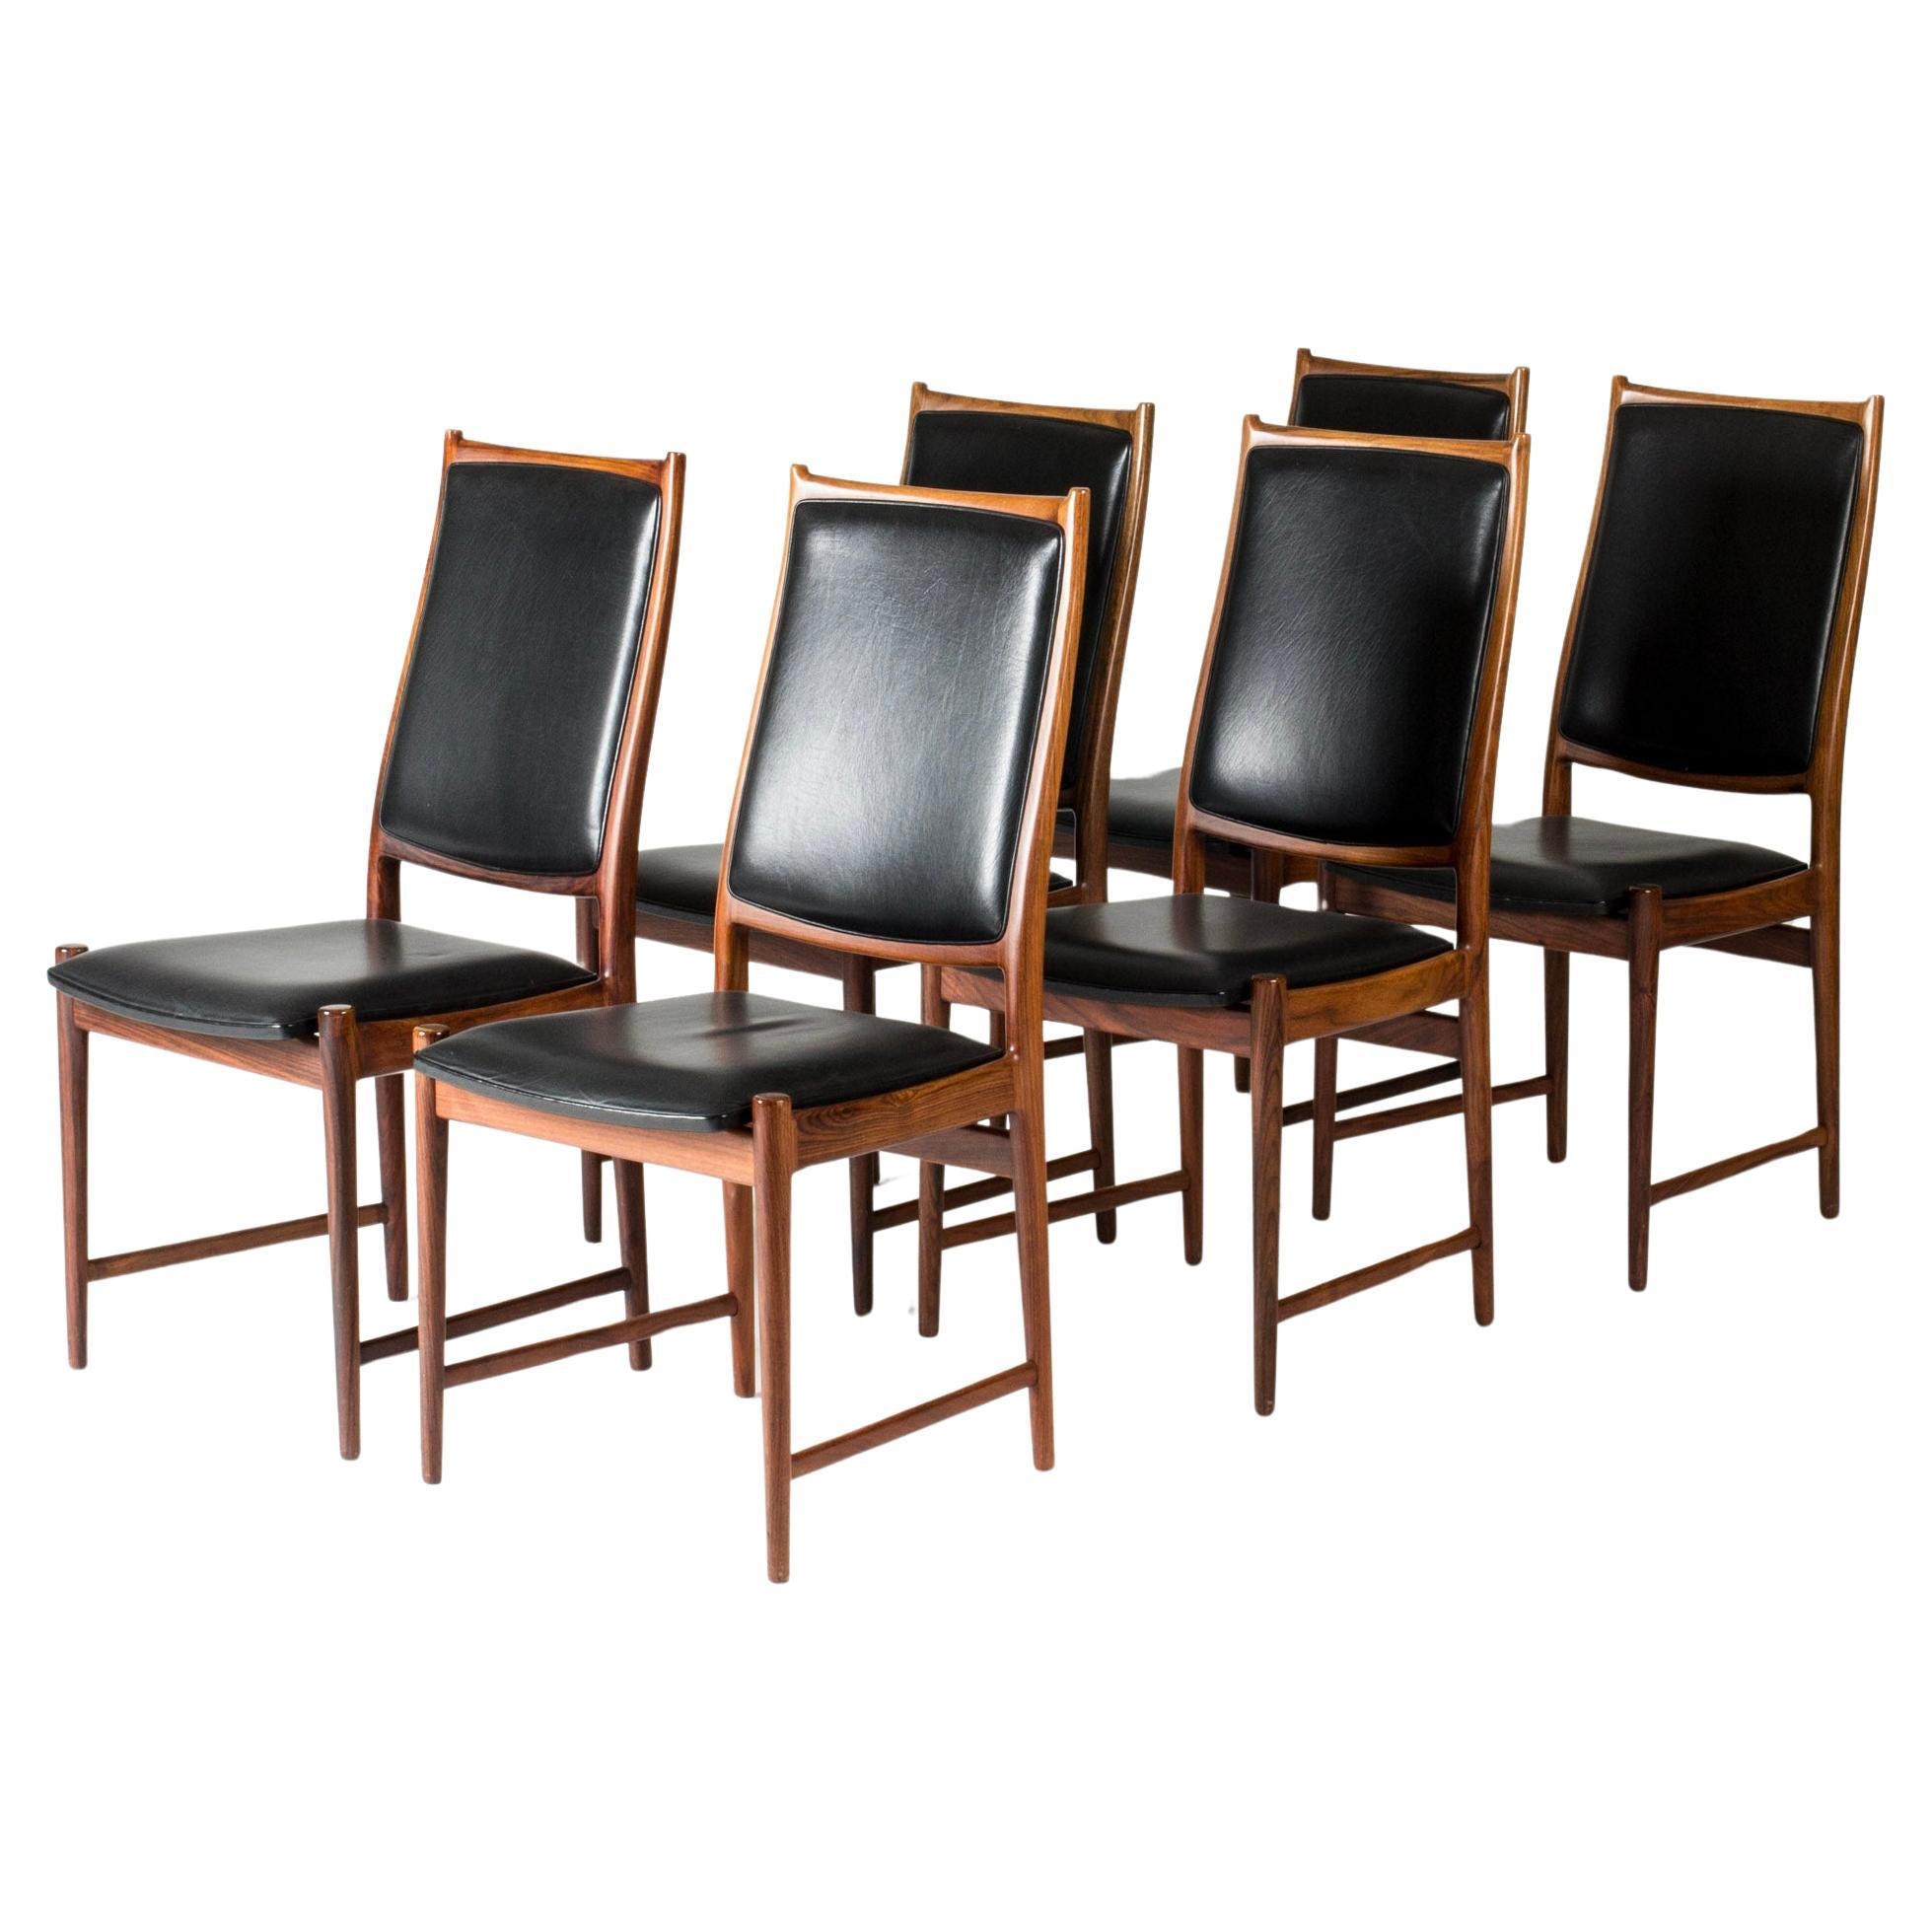 Midcentury dining chairs by Torbjørn Afdal, Bruksbo, Norway, 1960s, set of six For Sale